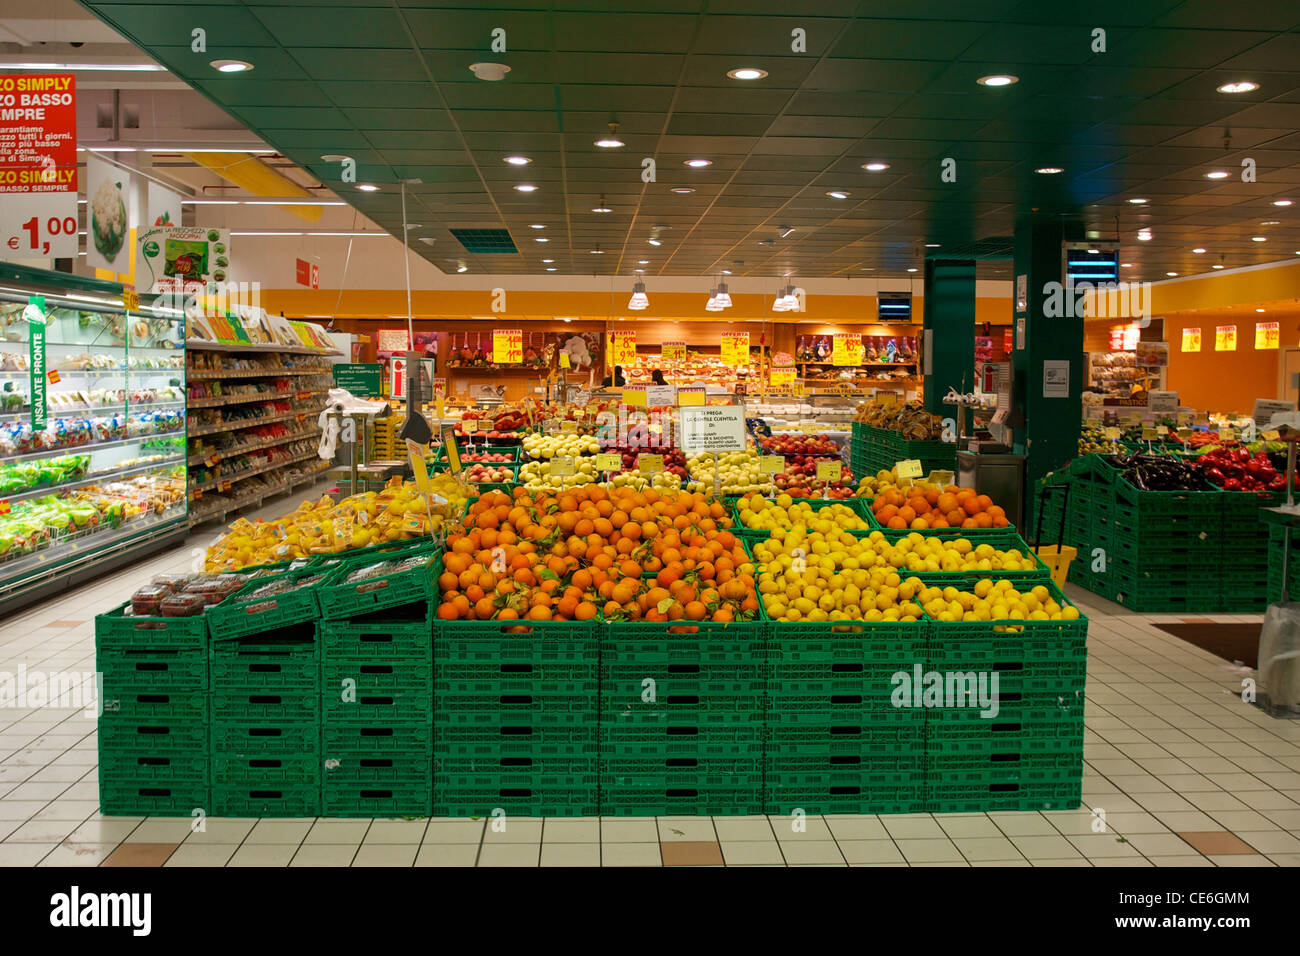 Fruit and veg, vegetable on display in an Italian supermarket, Marche, Italy Stock Photo